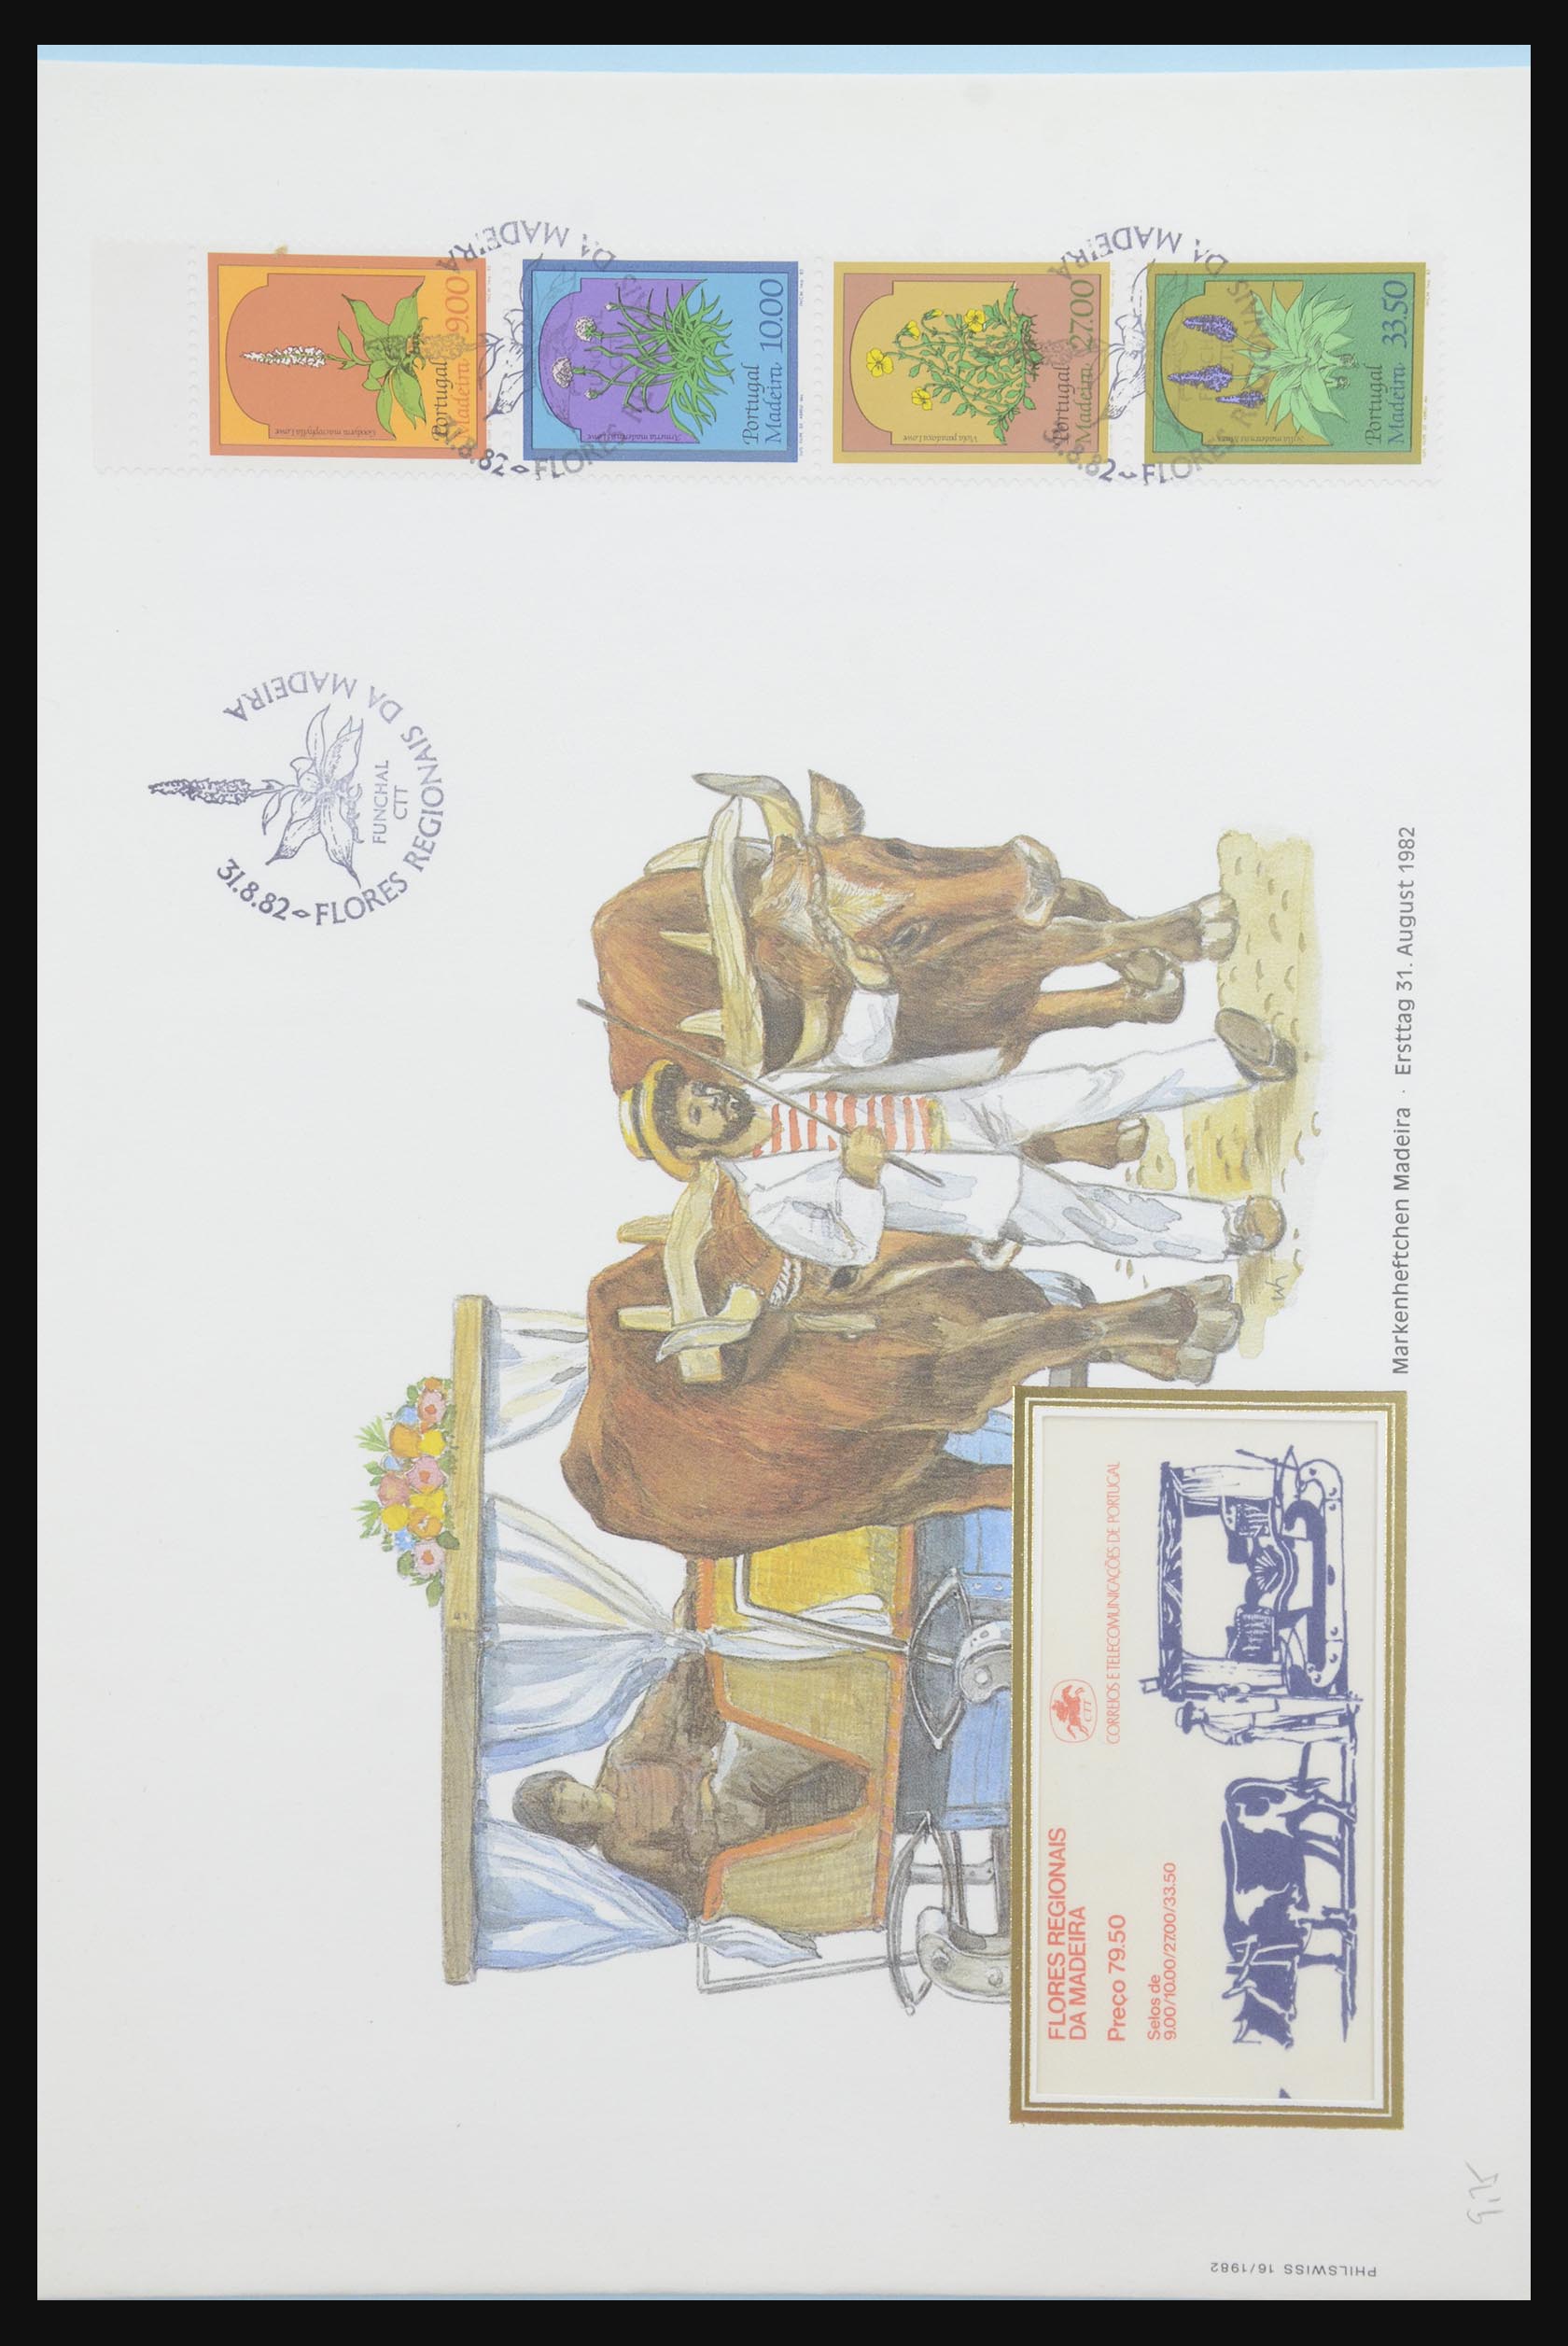 31915 096 - 31915 Western Europe souvenir sheets and stamp booklets on FDC.